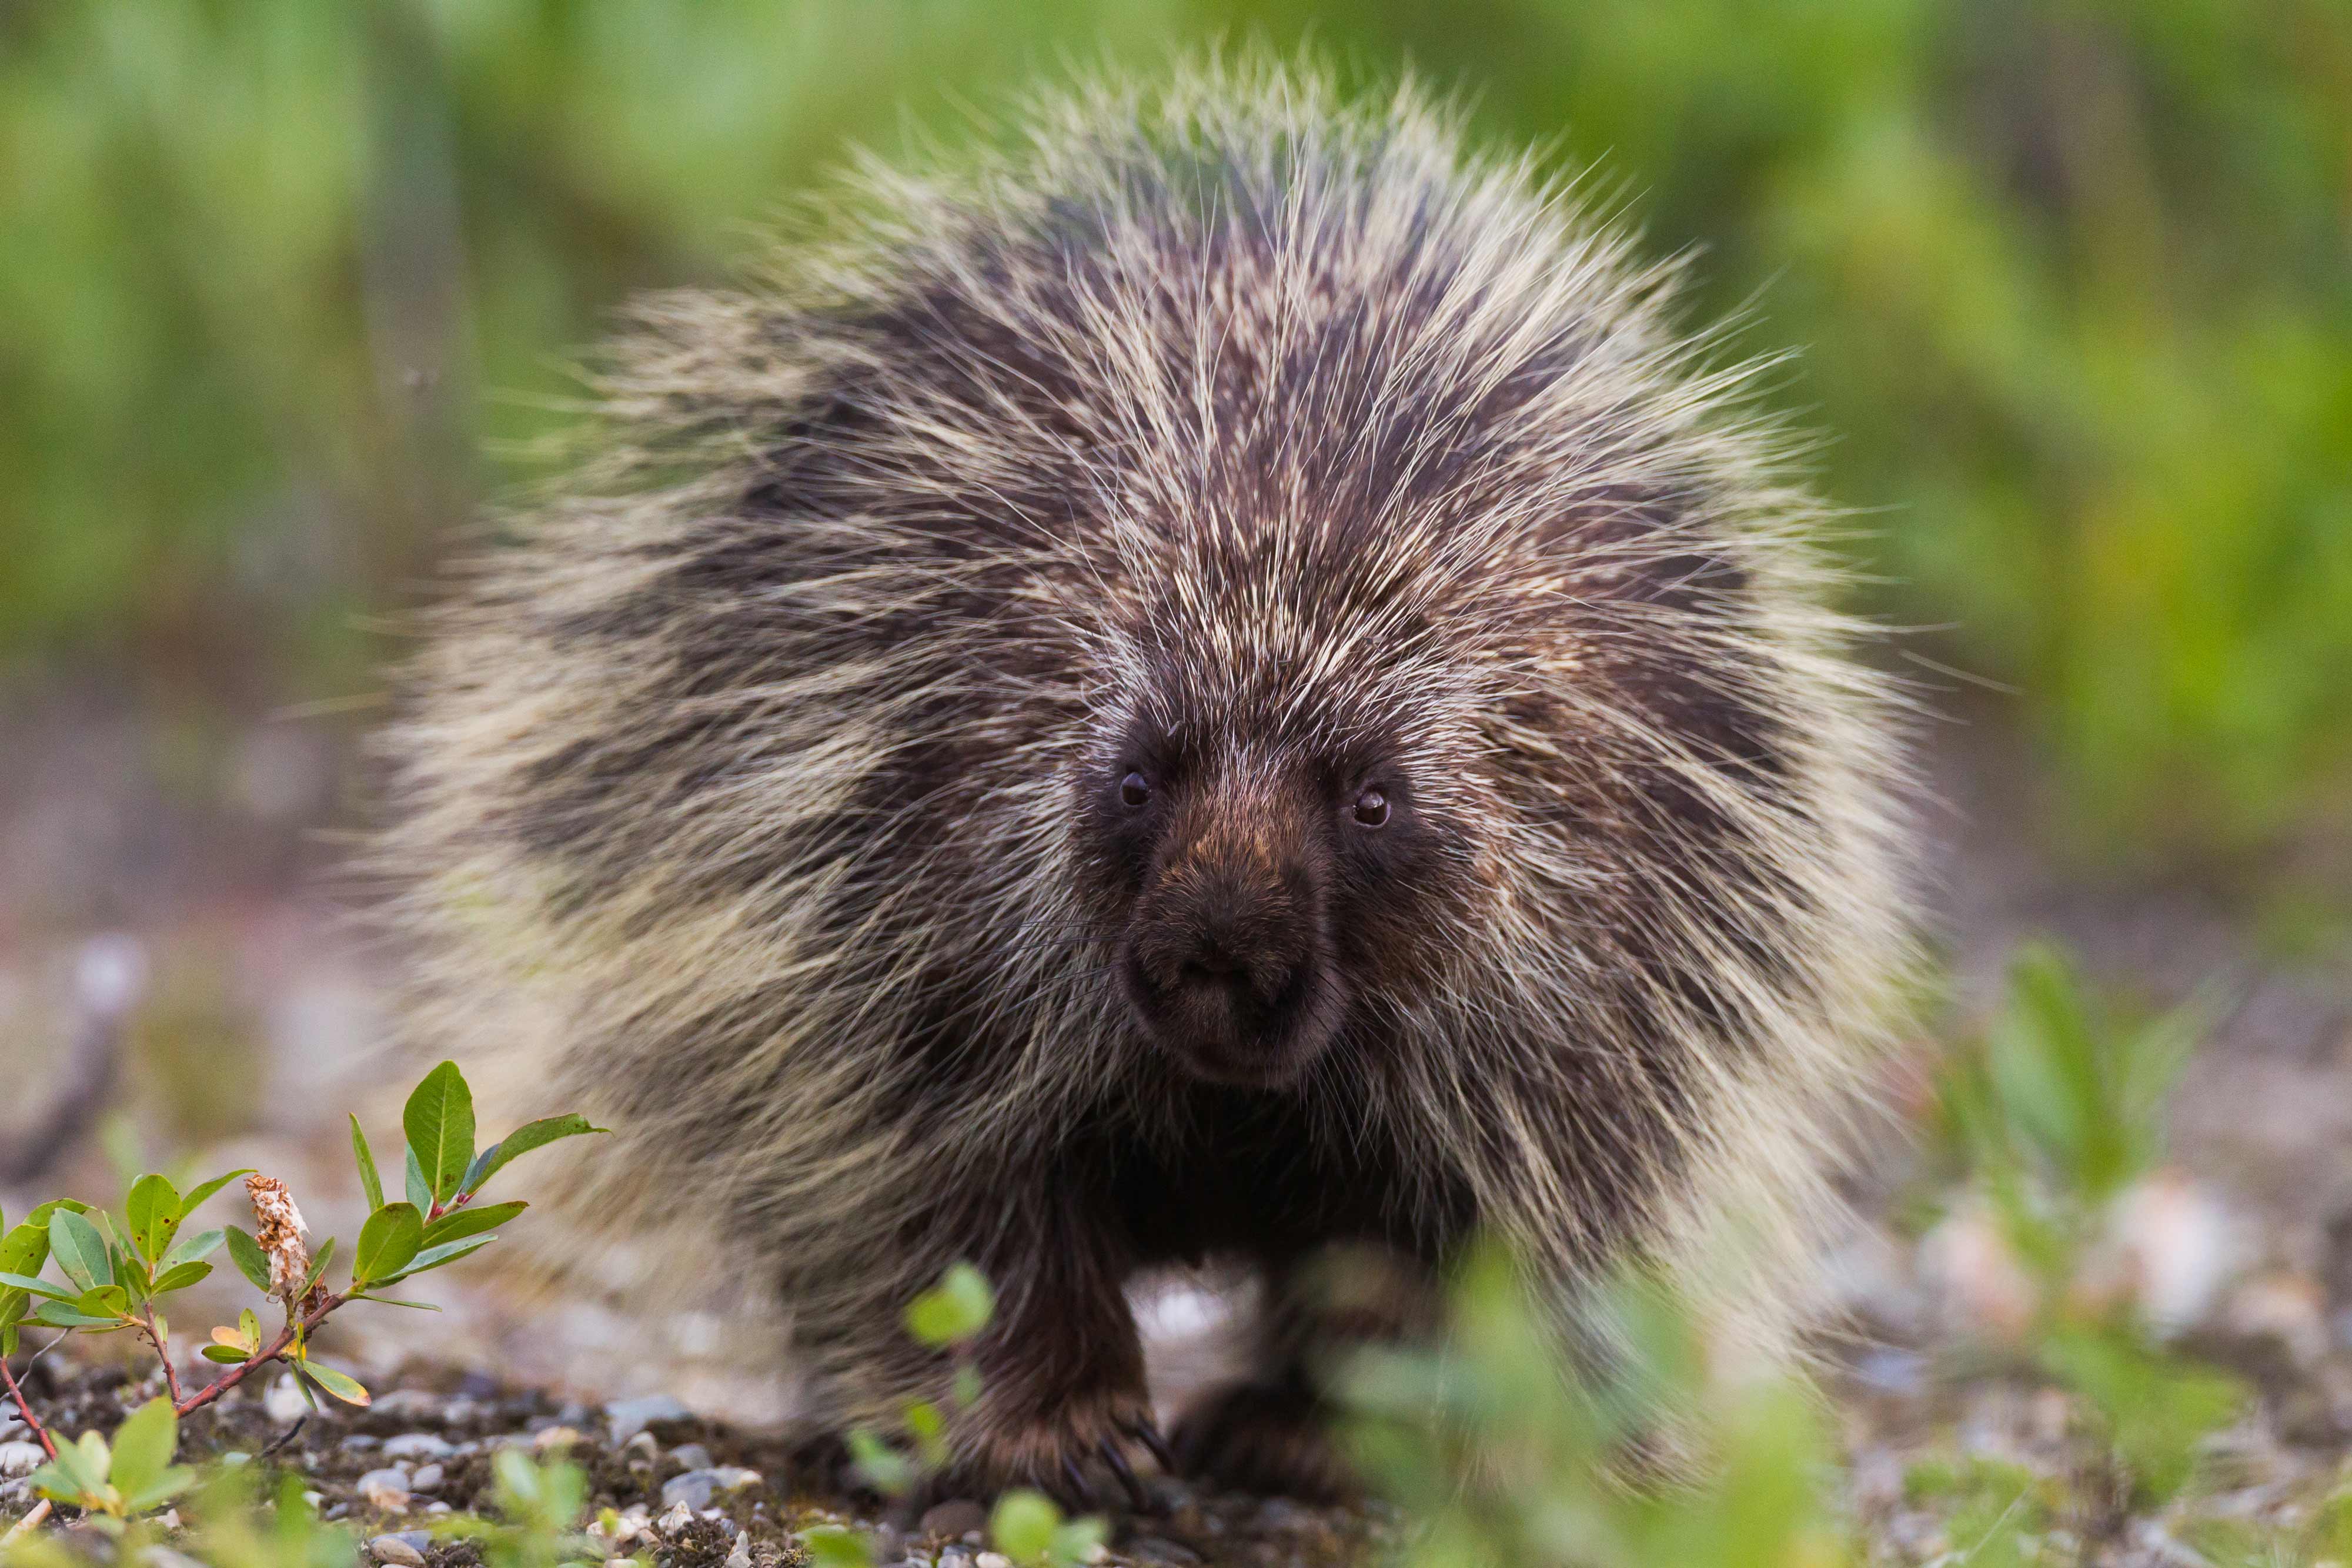 A porcupine walking towards the camera.